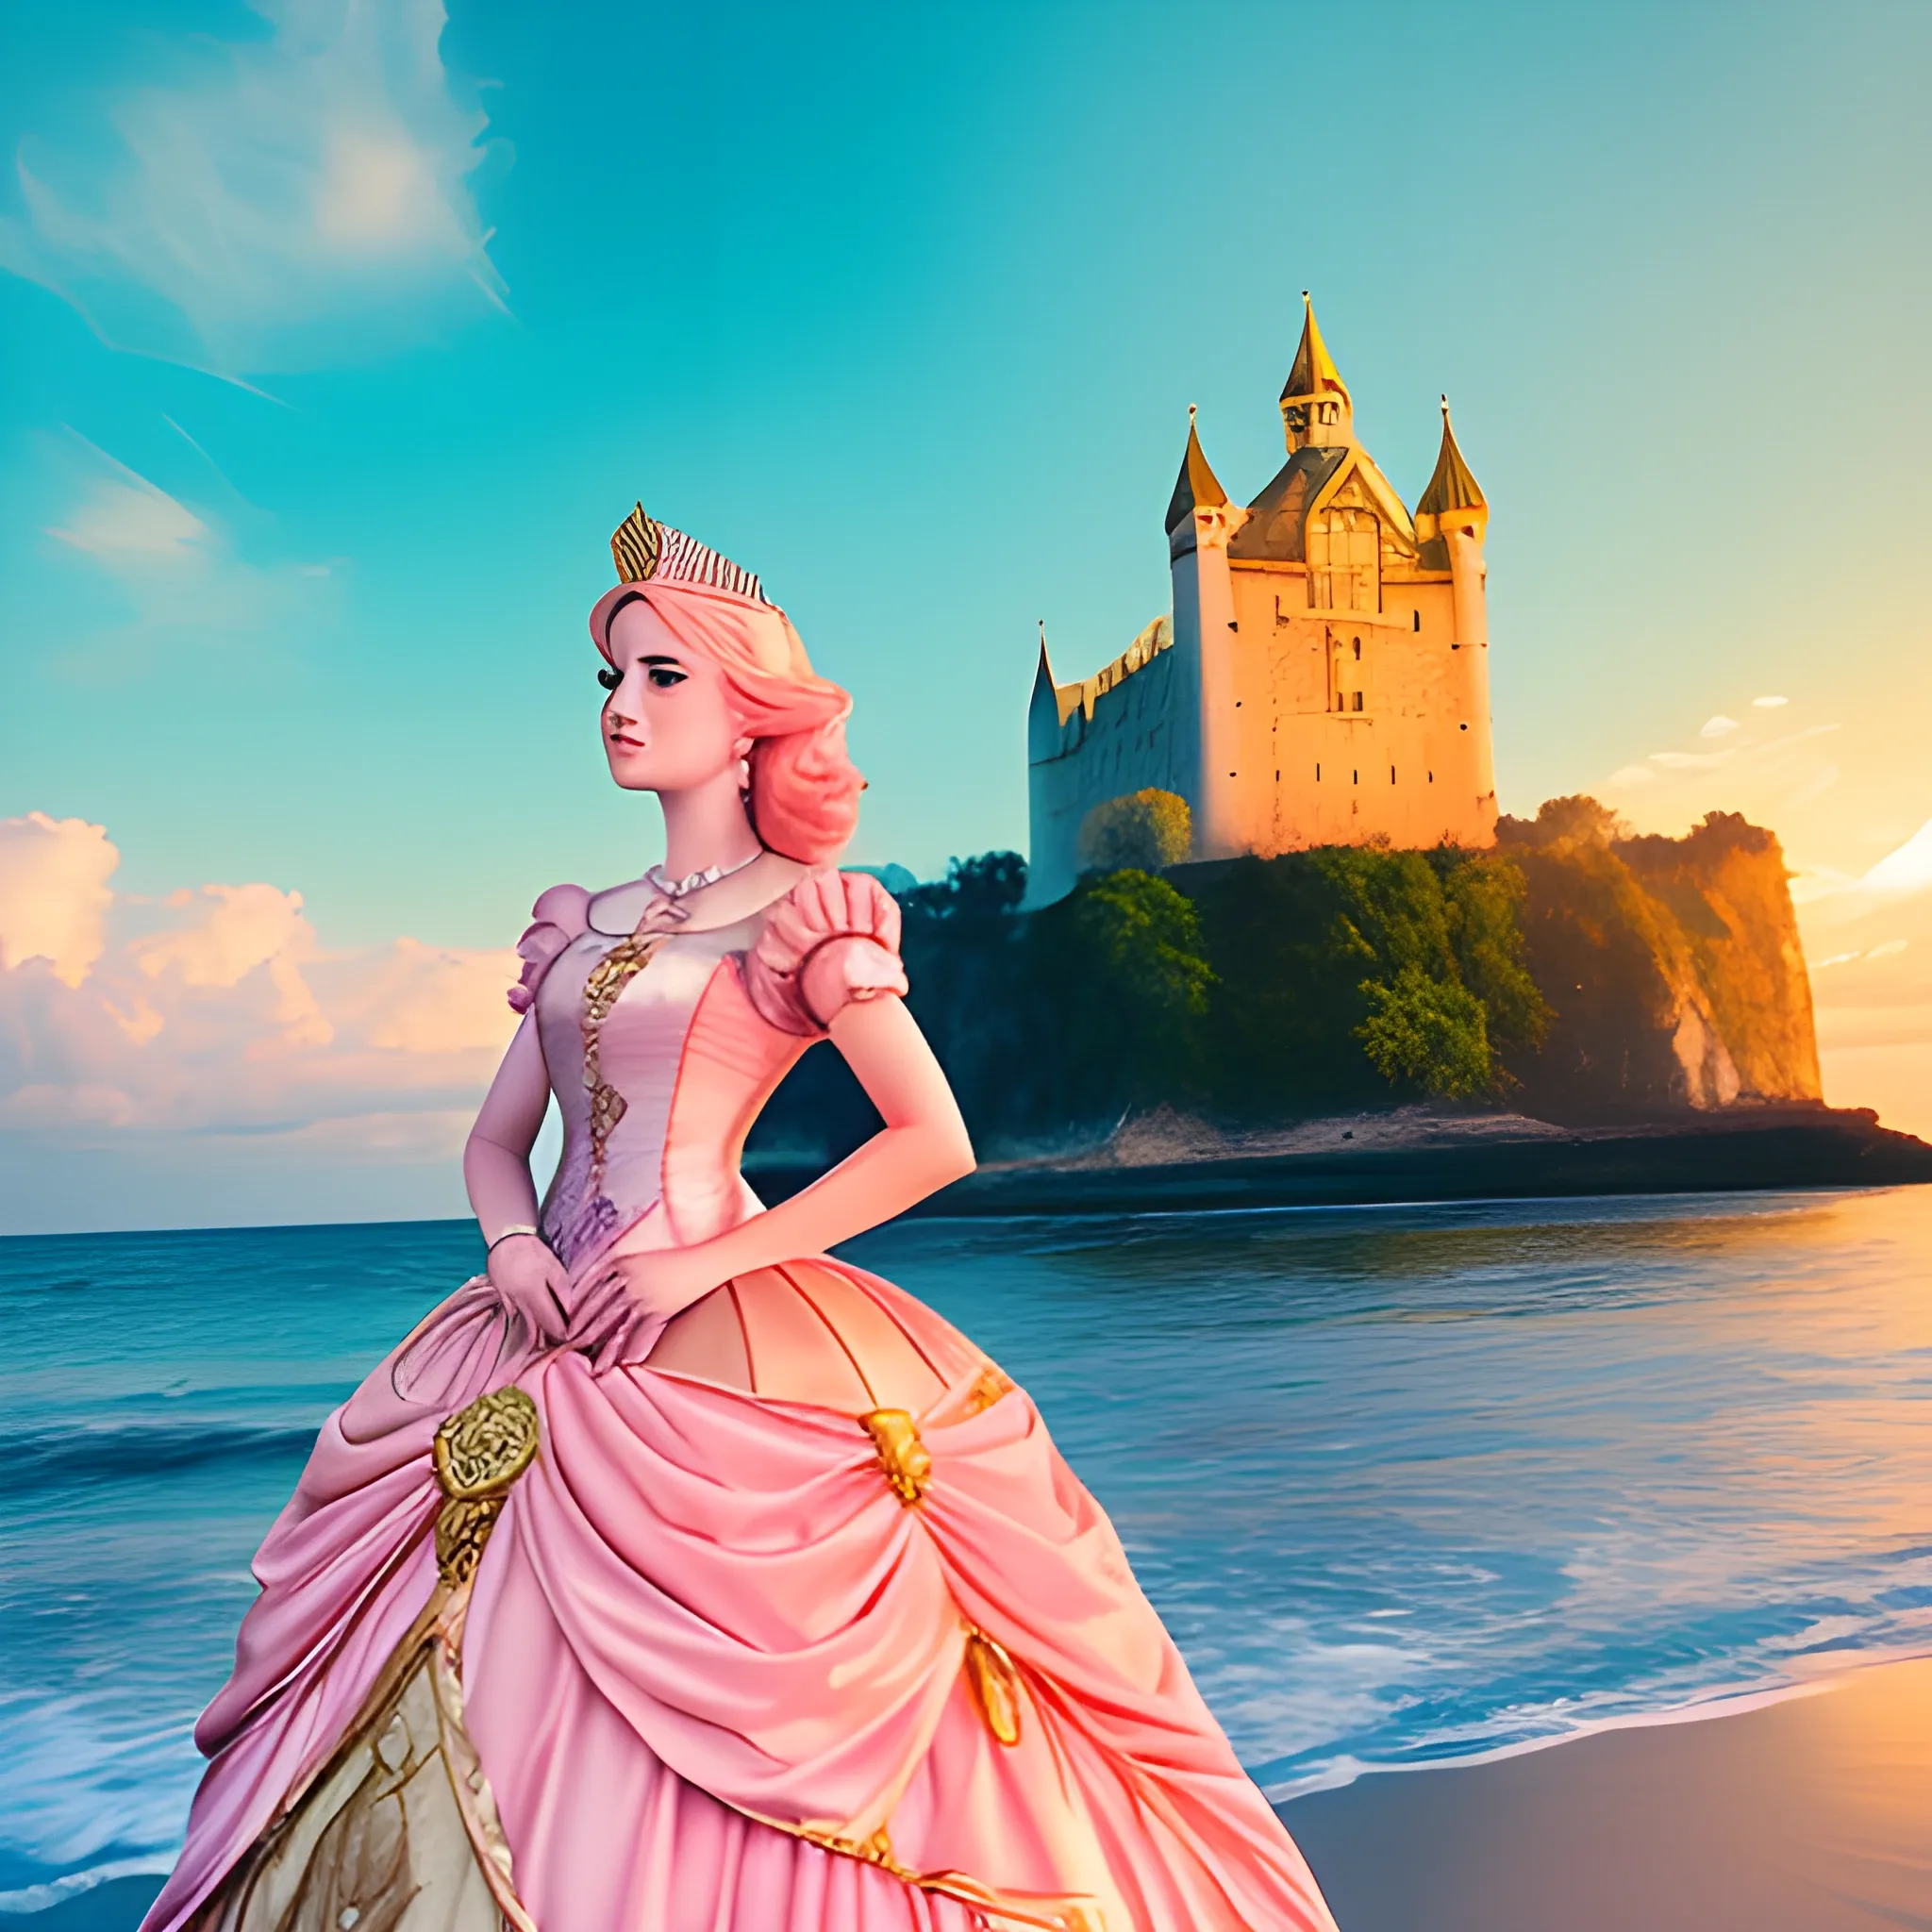 miss xv photography golden hour princess pink, background sea and cloud and casttle